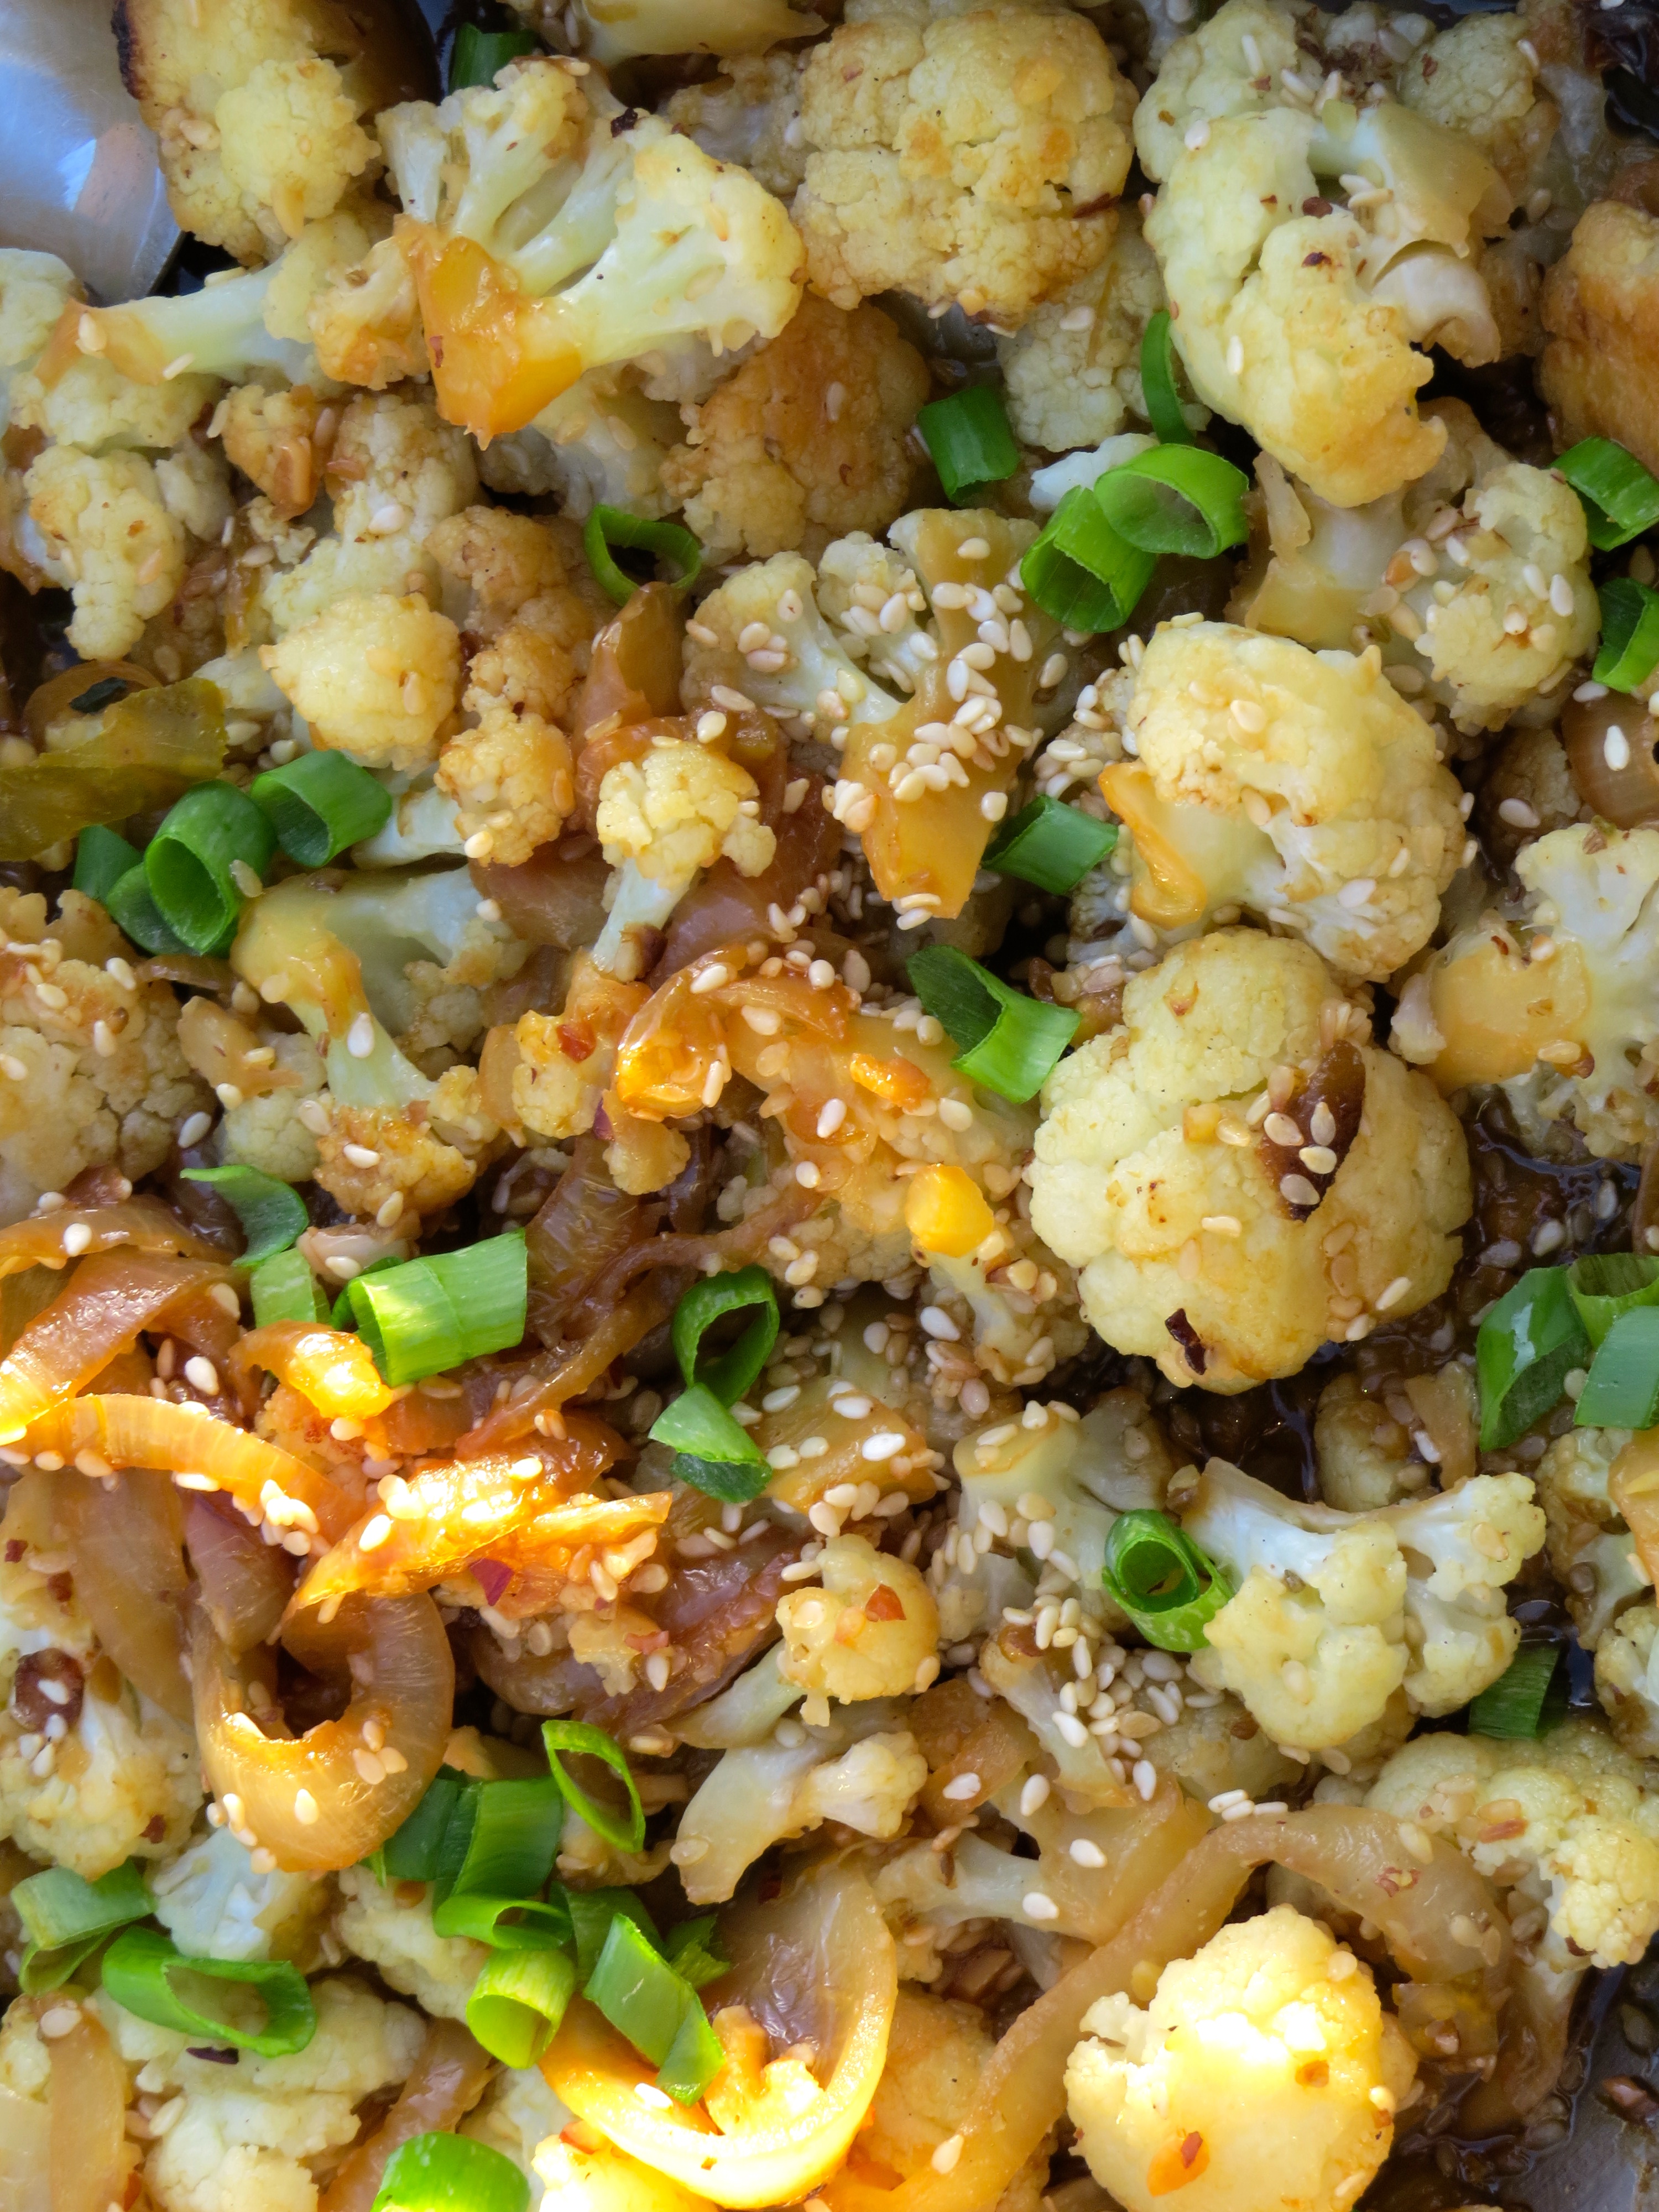 Stir-fried Sesame Cauliflower, a strongly seasoned side dish with chile, garlic and ginger.